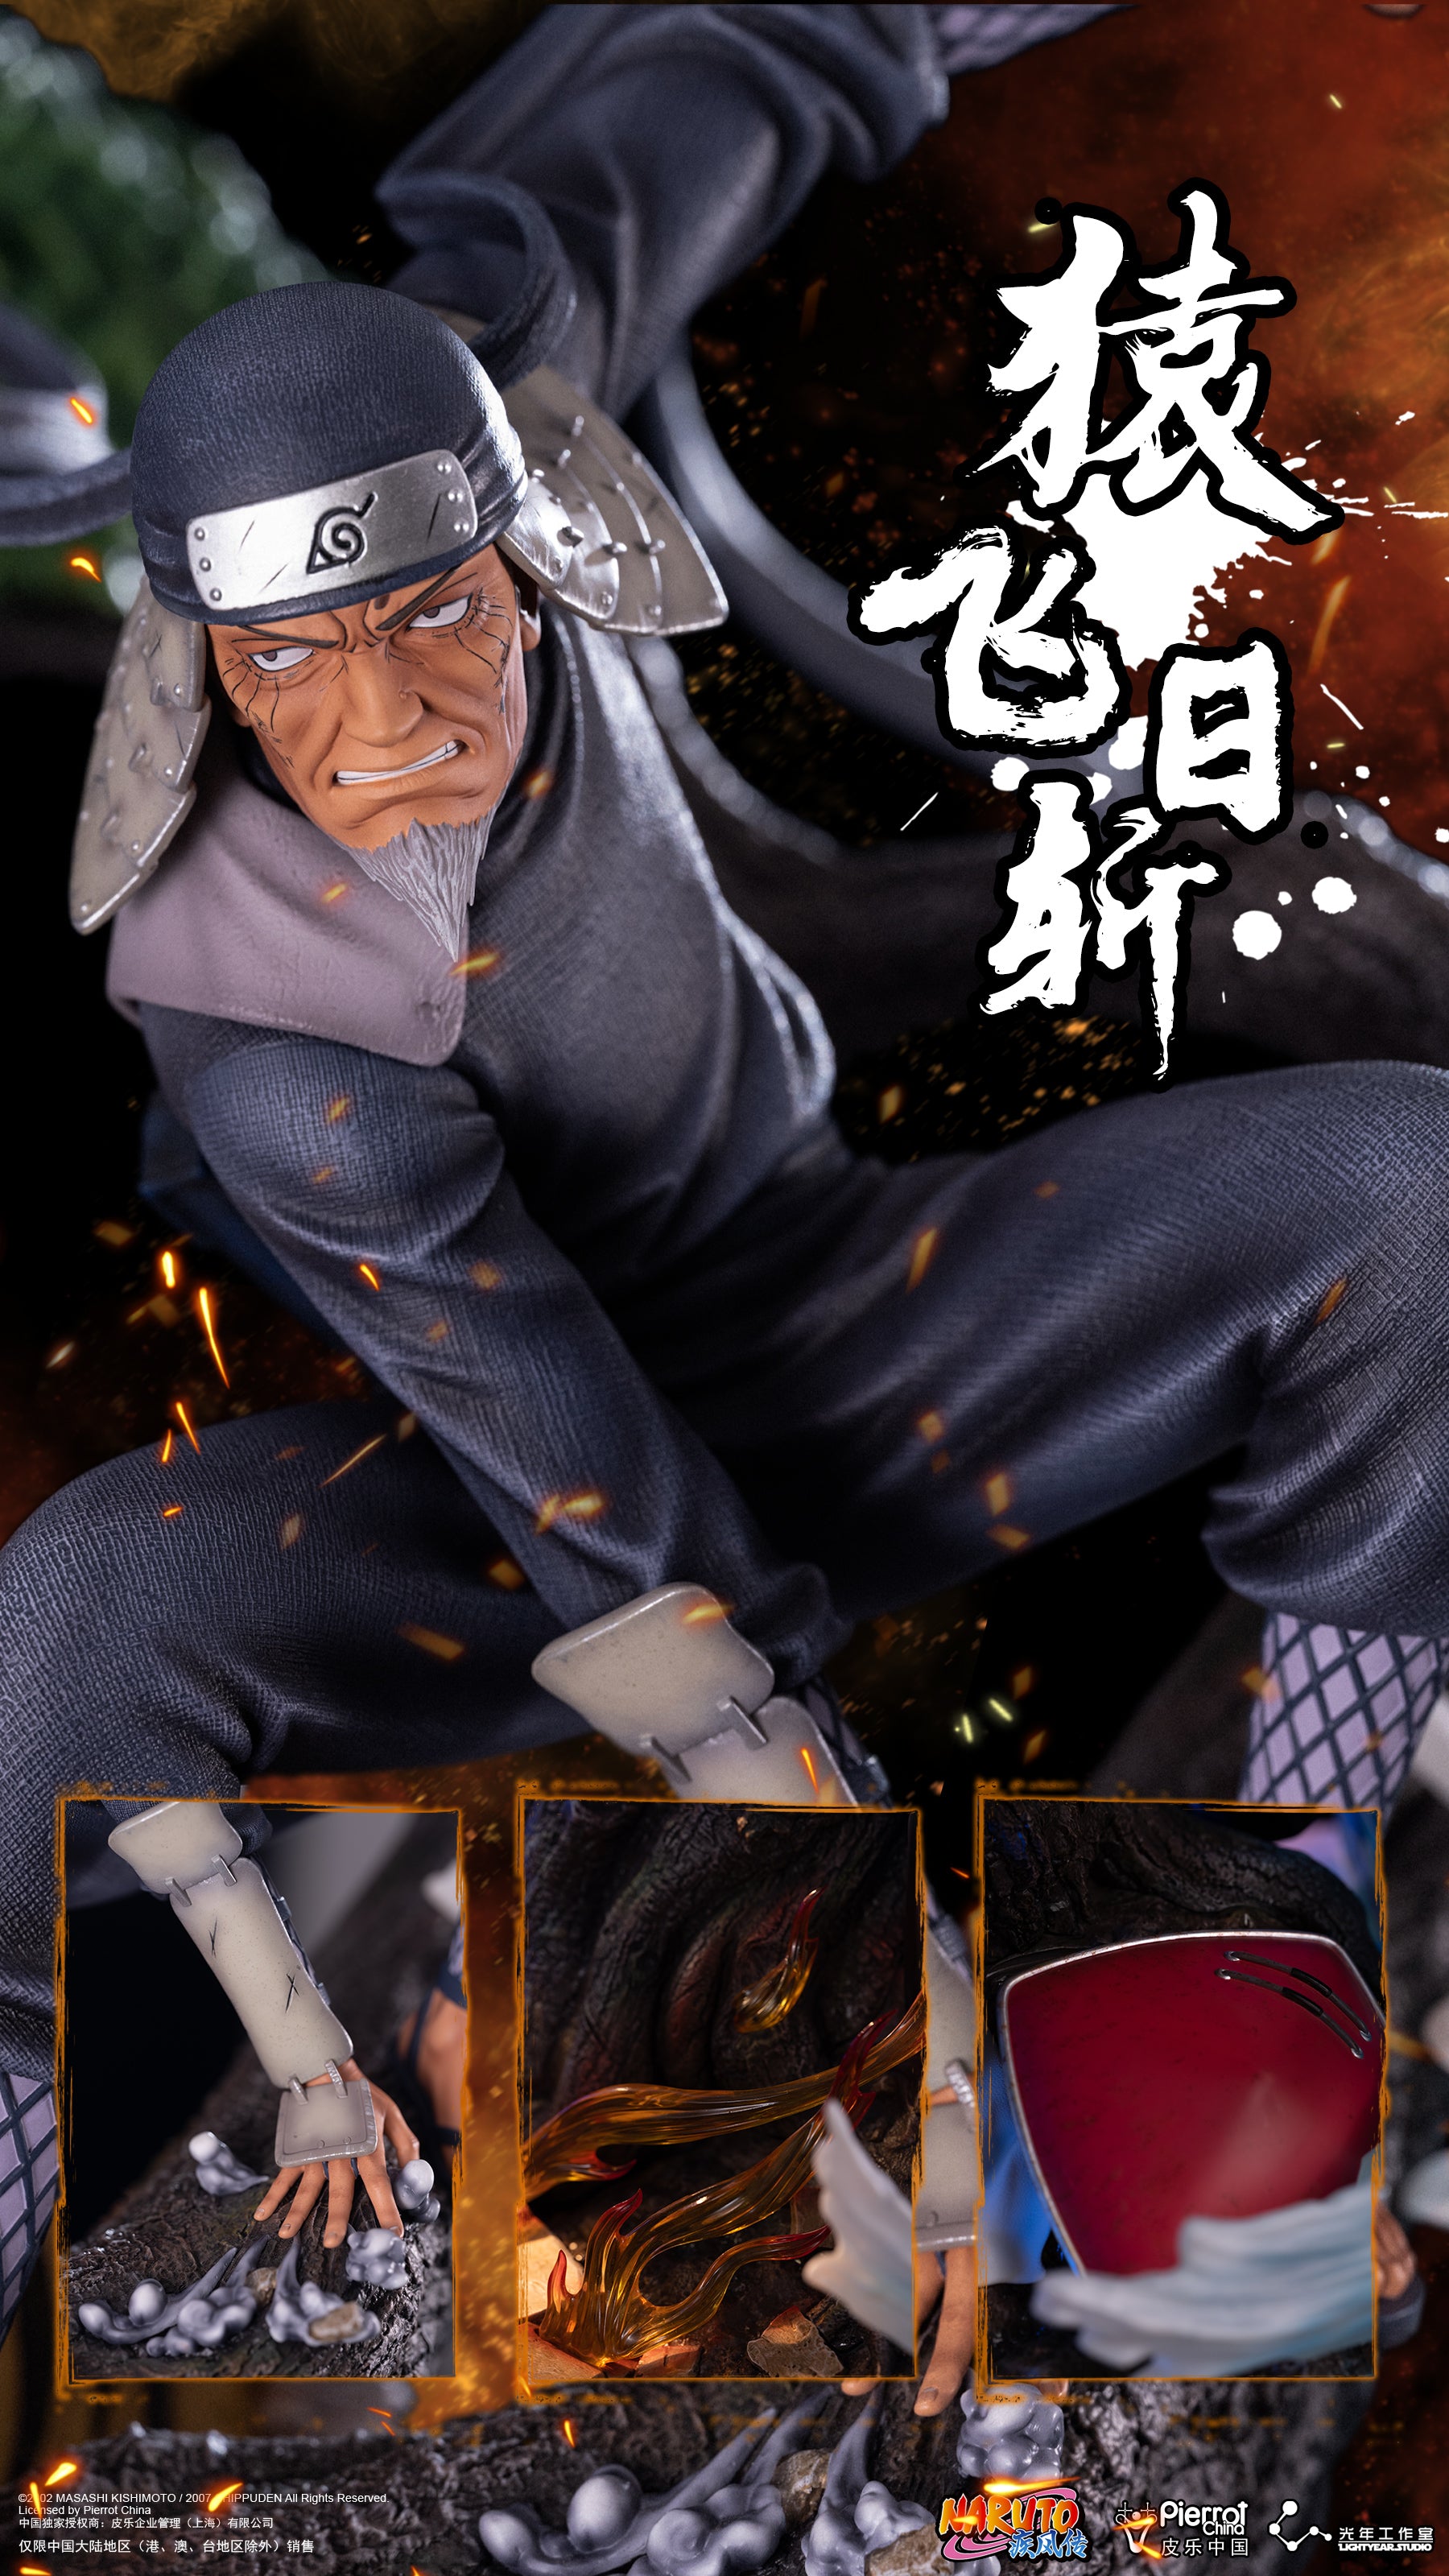 Naruto UNS3 - Third Hokage (Hiruzen) Pack FOR XPS by